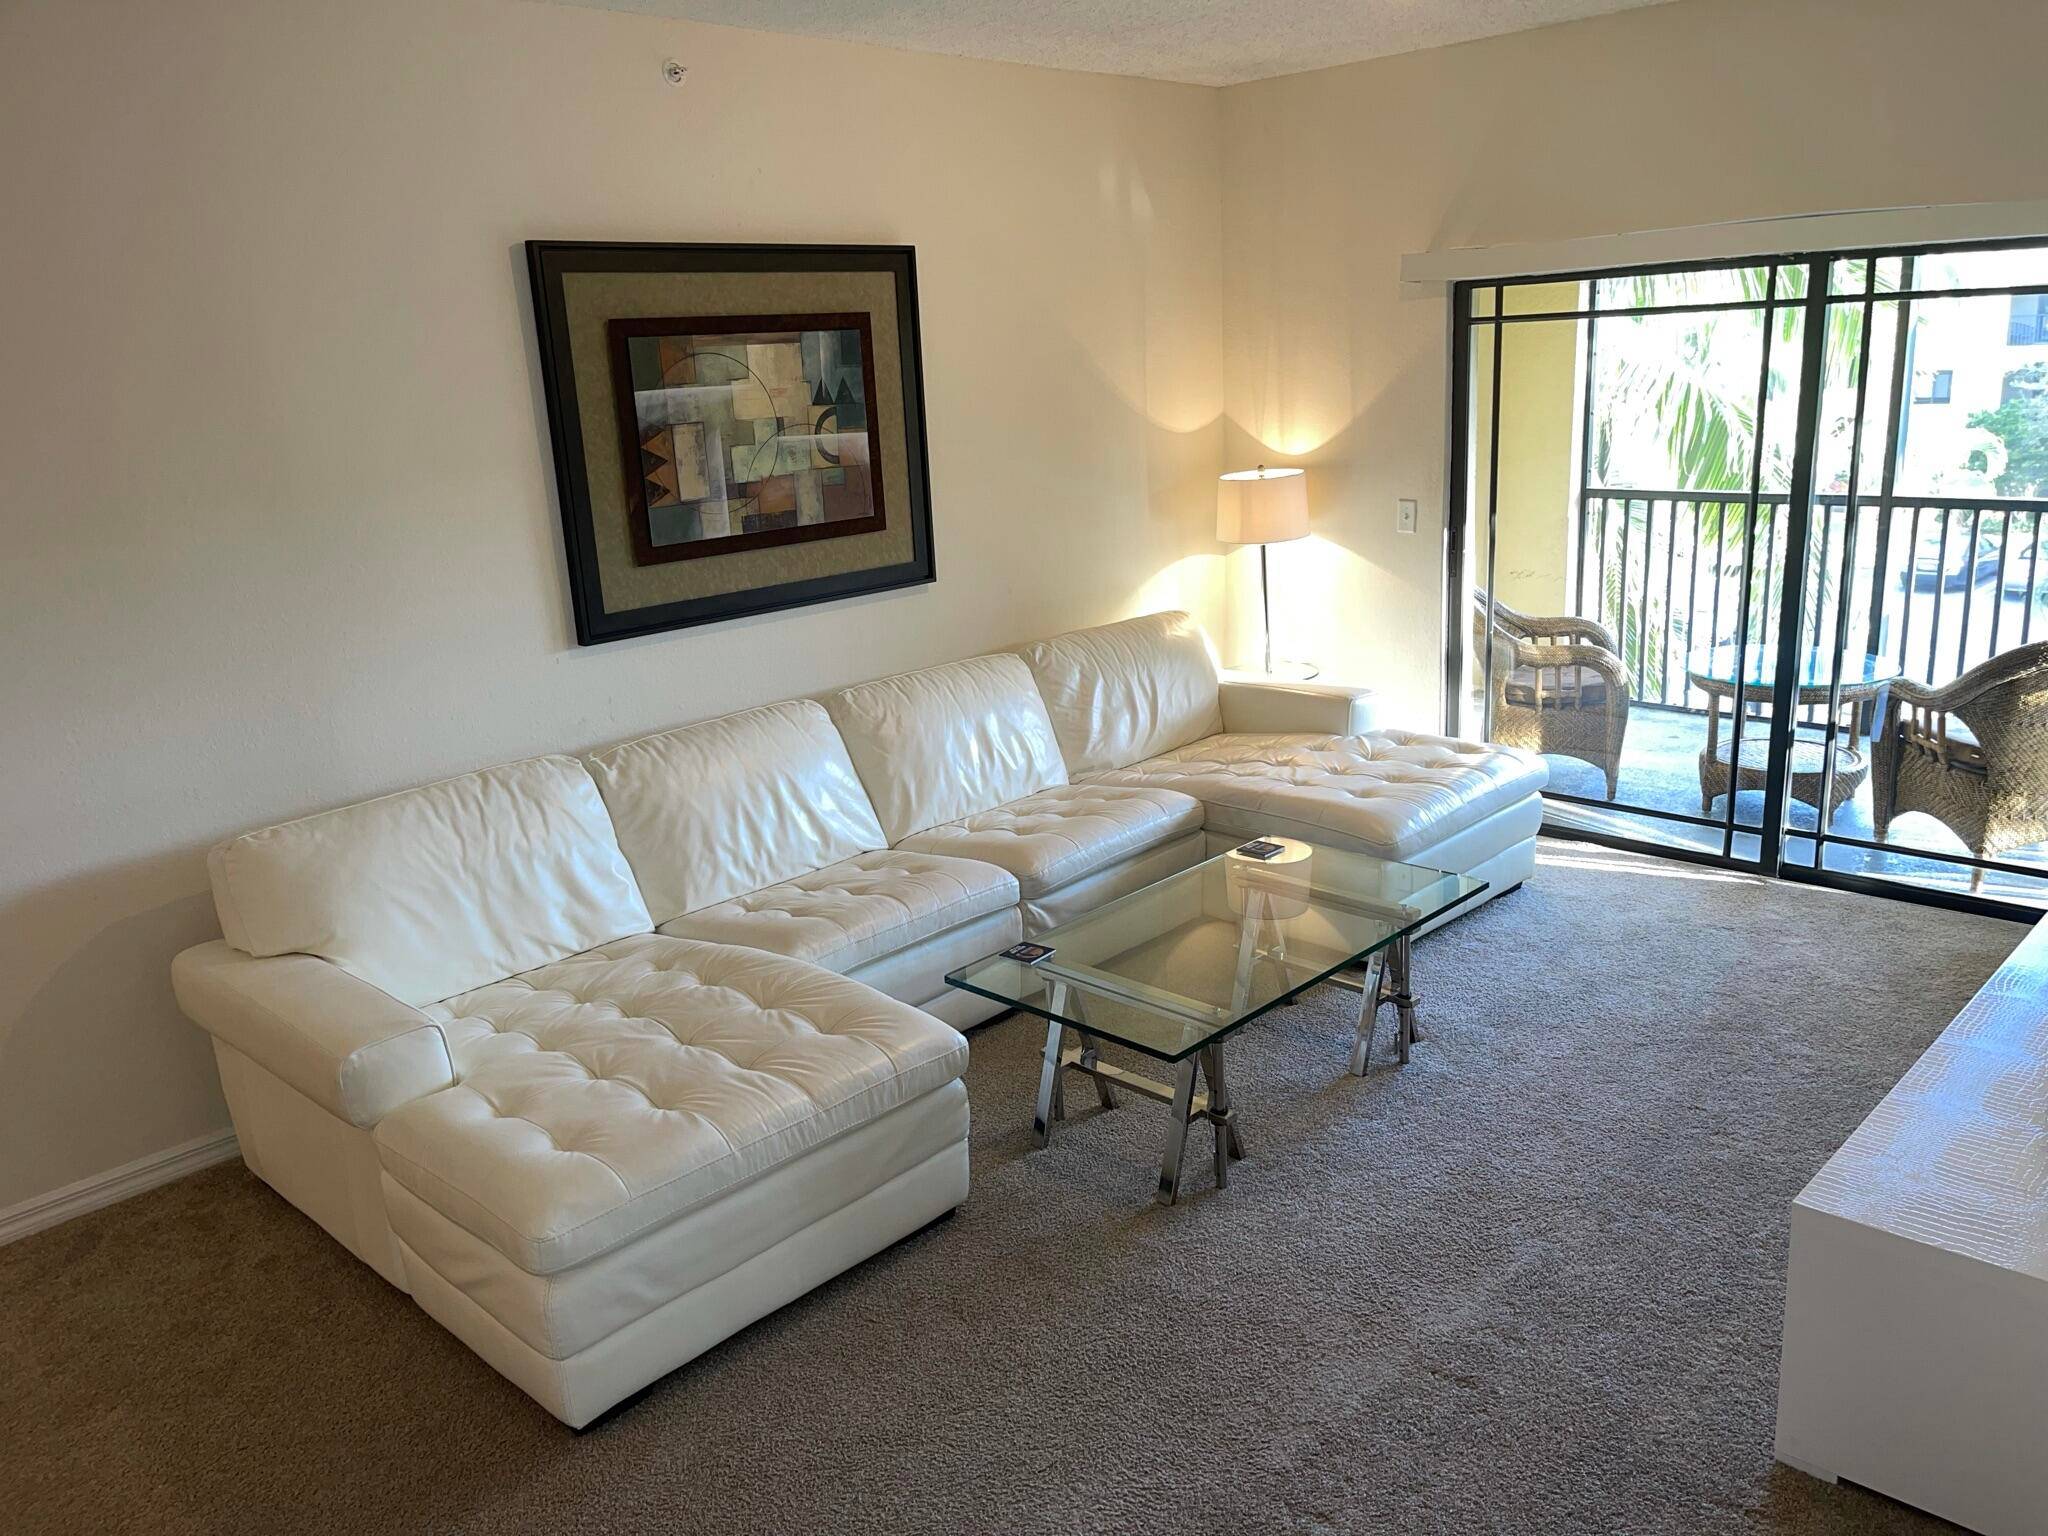 Beautifully Furnished 3 Bedroom 2 Bath Condo in a Gated Community in Palm Beach Gardens.